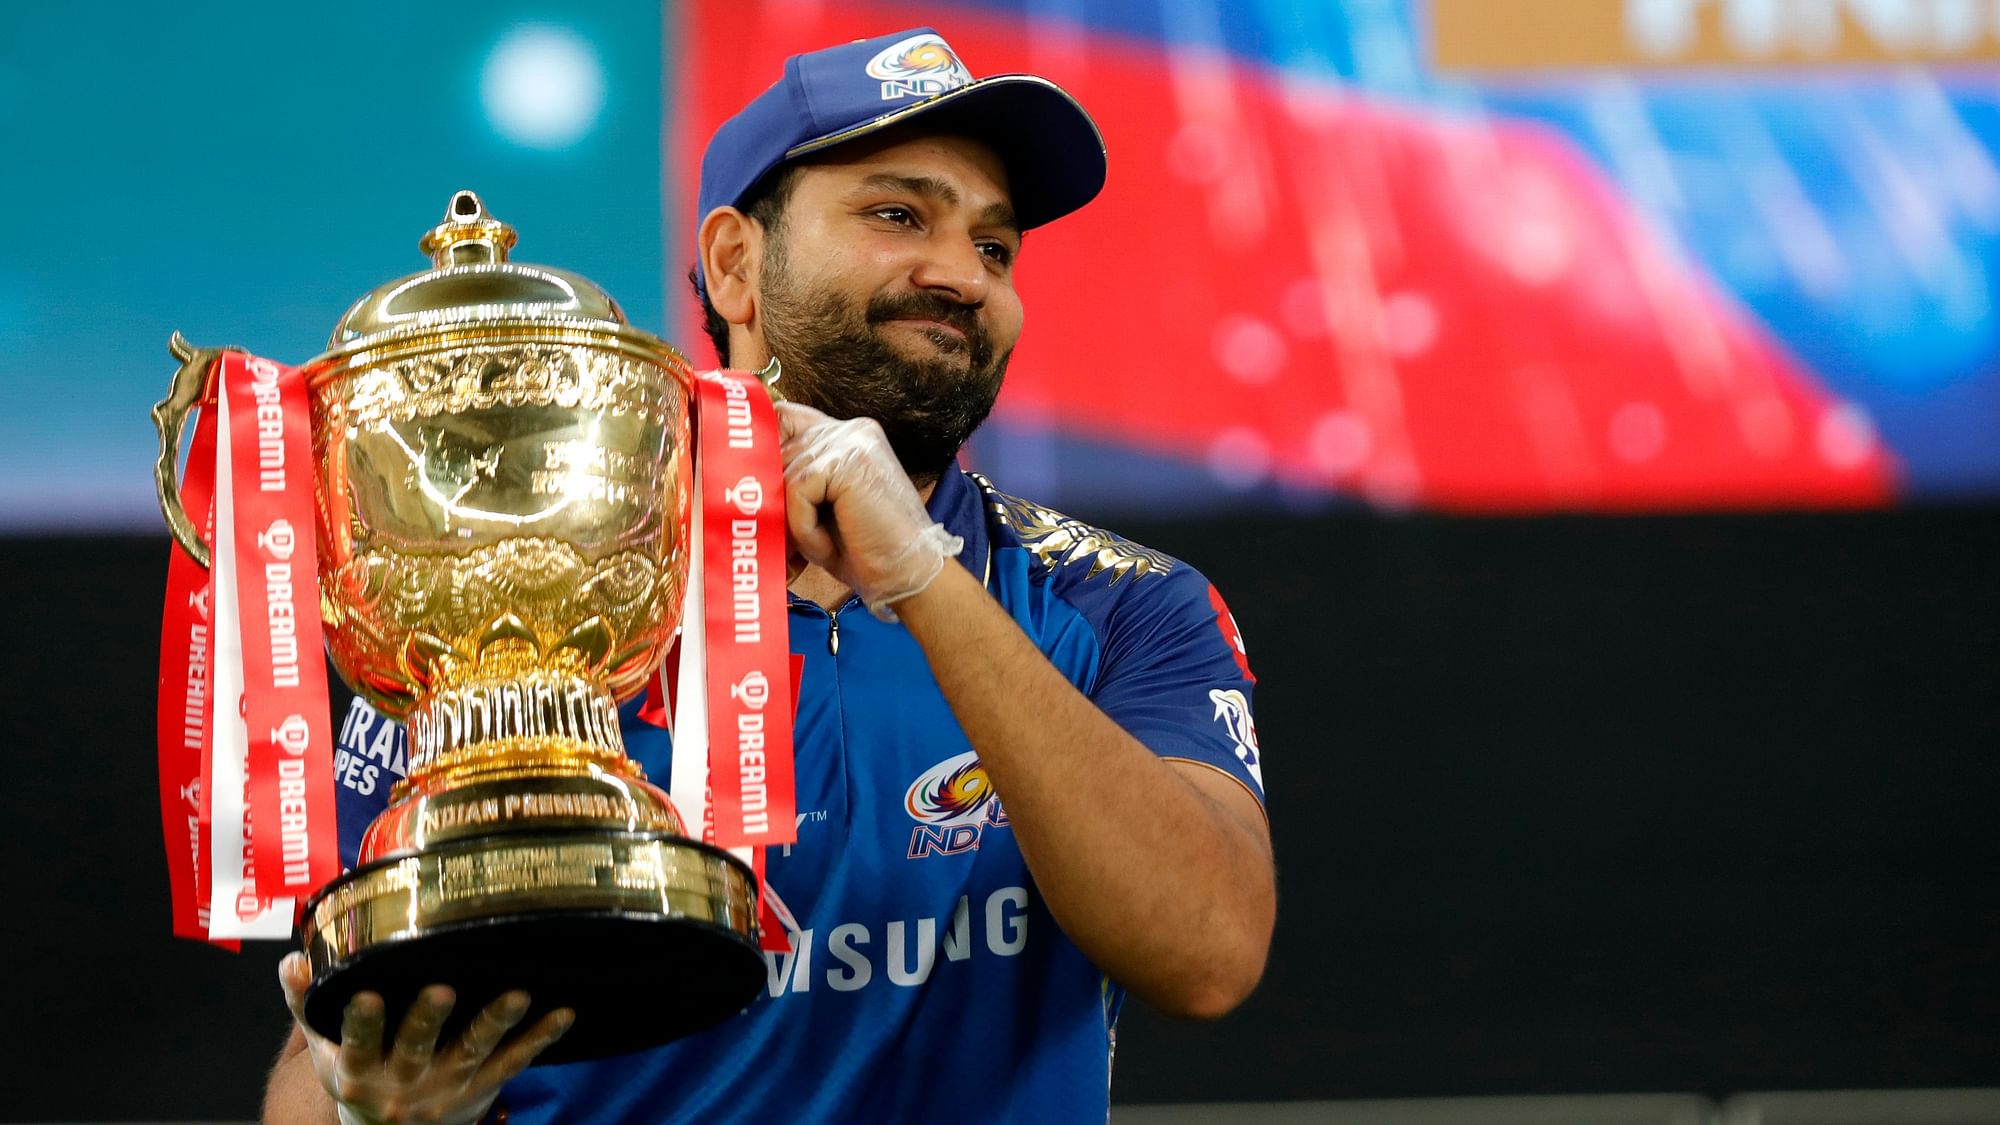 IPL 2021’s schedule has been announced. It will start on 9 April with the final on 30 May, 2021.